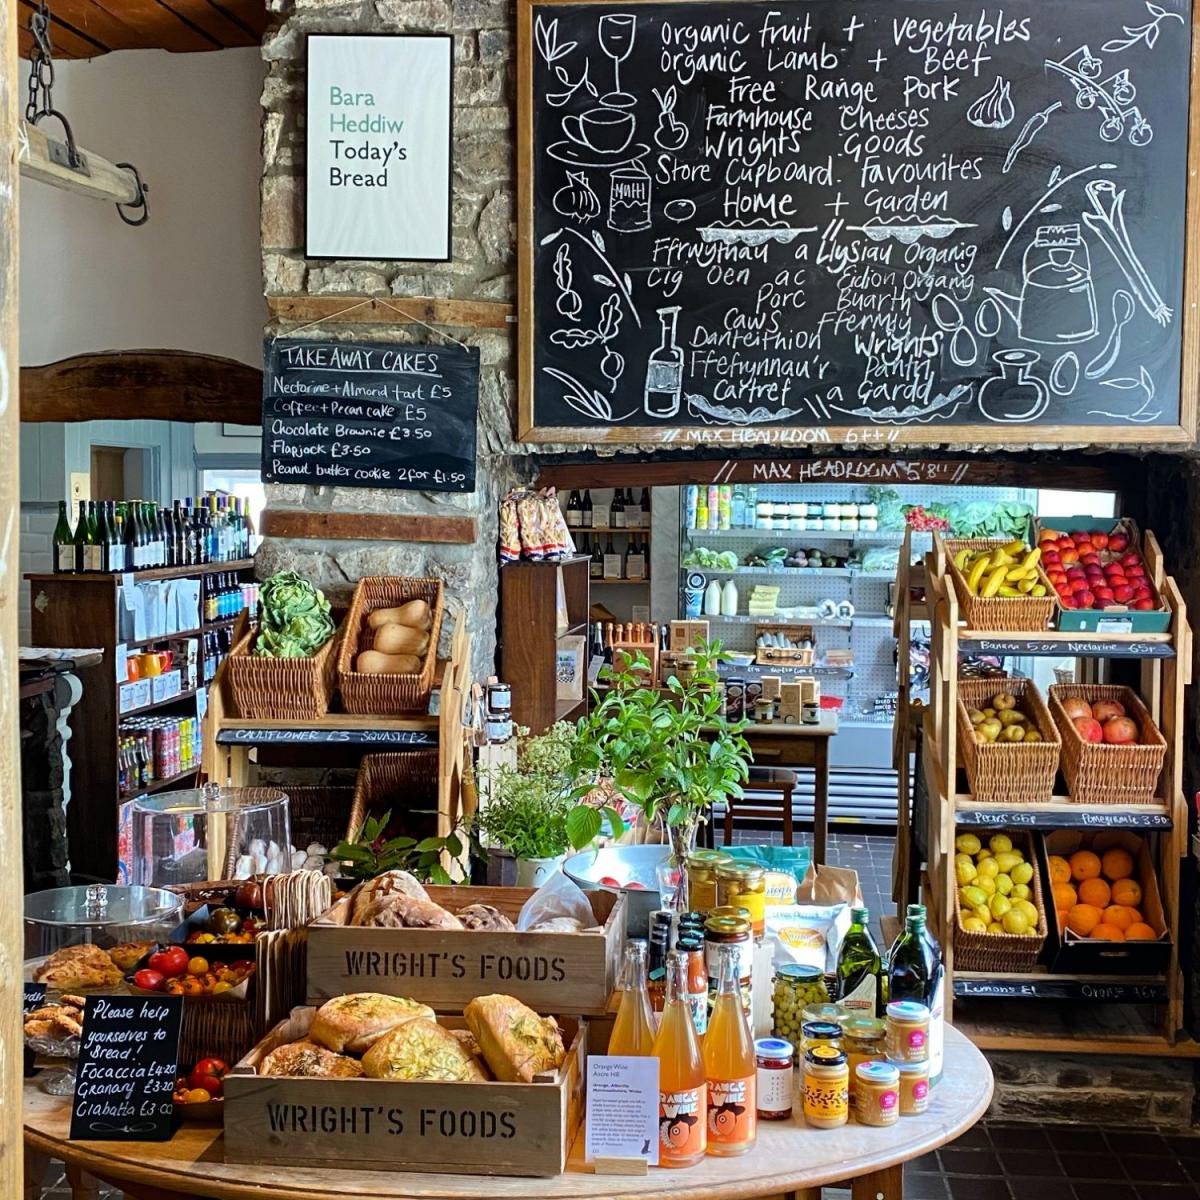 Images from Wright's Food Emporium